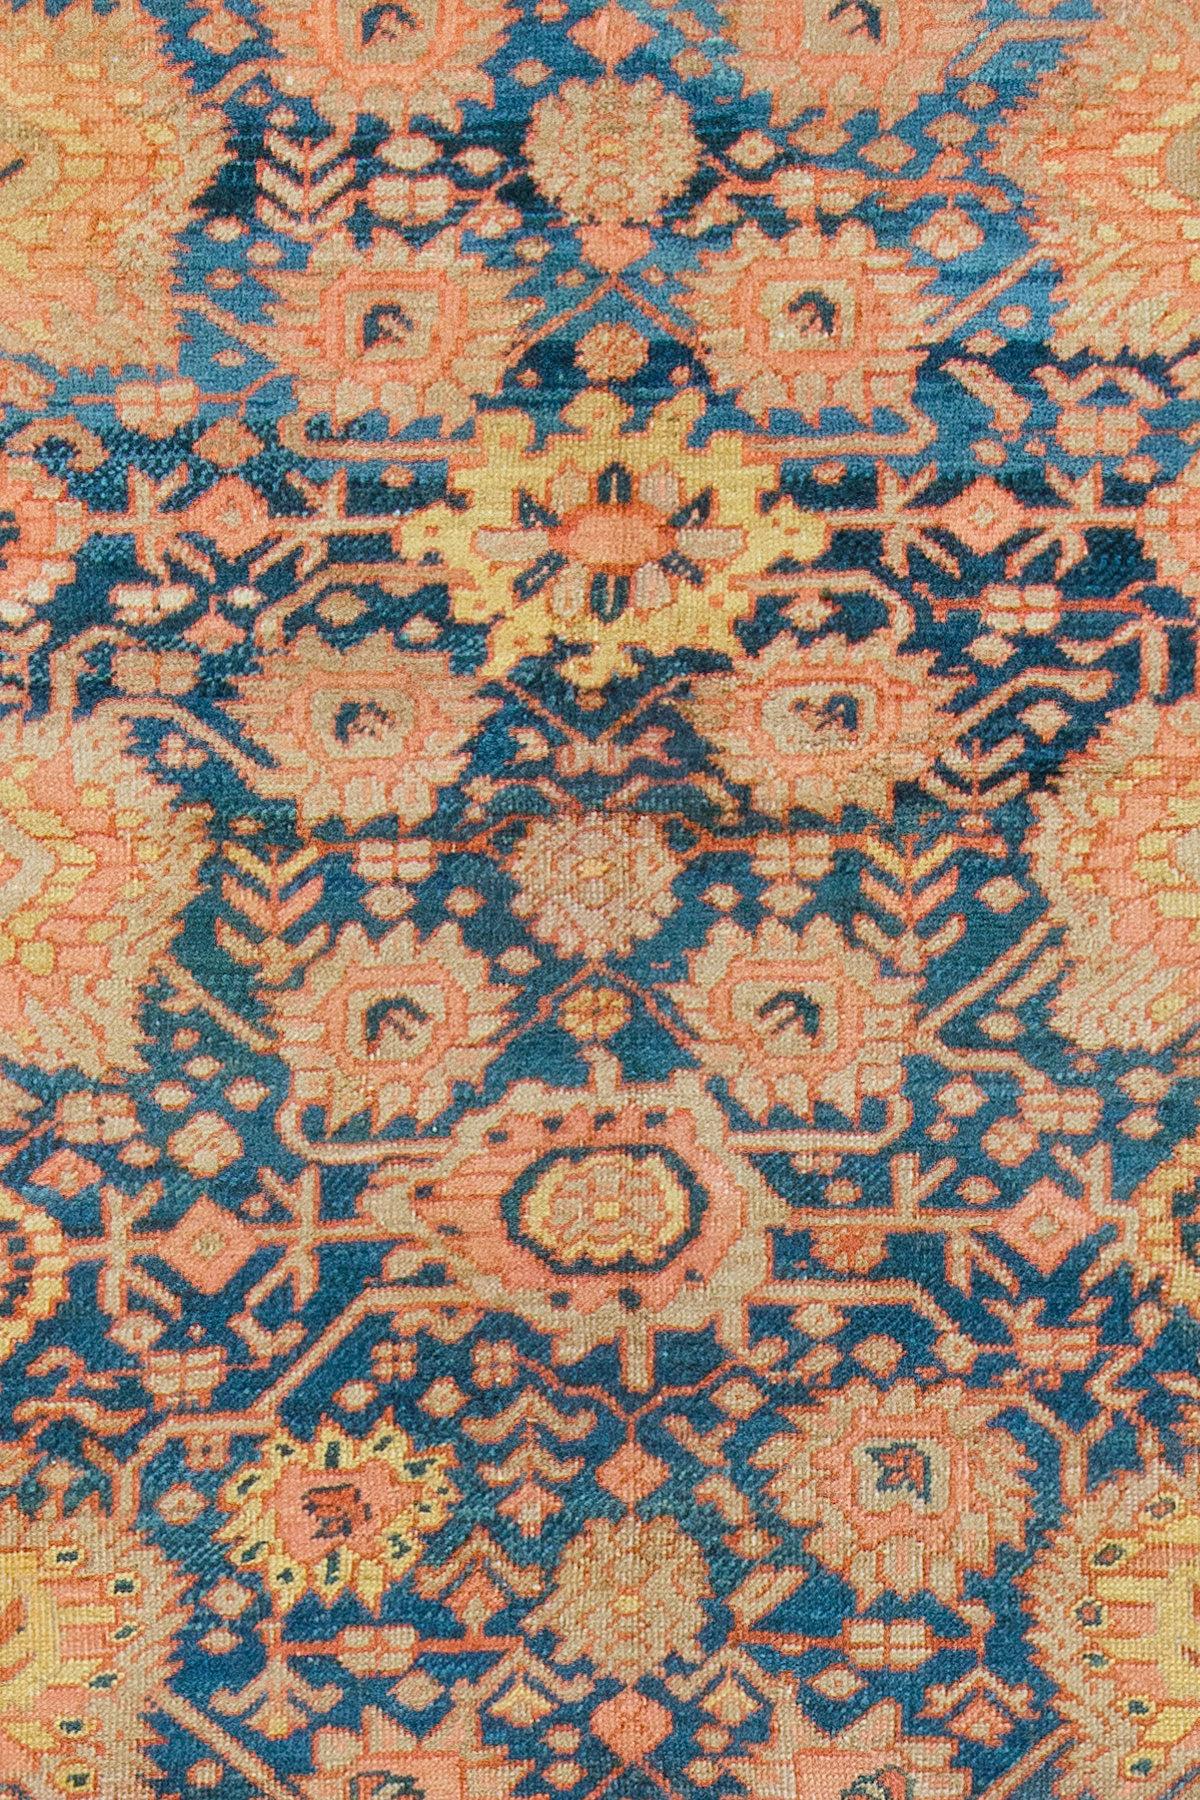 Highly collectible quality oversize blue color all-over field 19th century Persian Bakshaish rug. The harmonious colors, skillful geometry and weavers craftsmanship make this rug an absolute work of art.

The best antique rugs and carpets